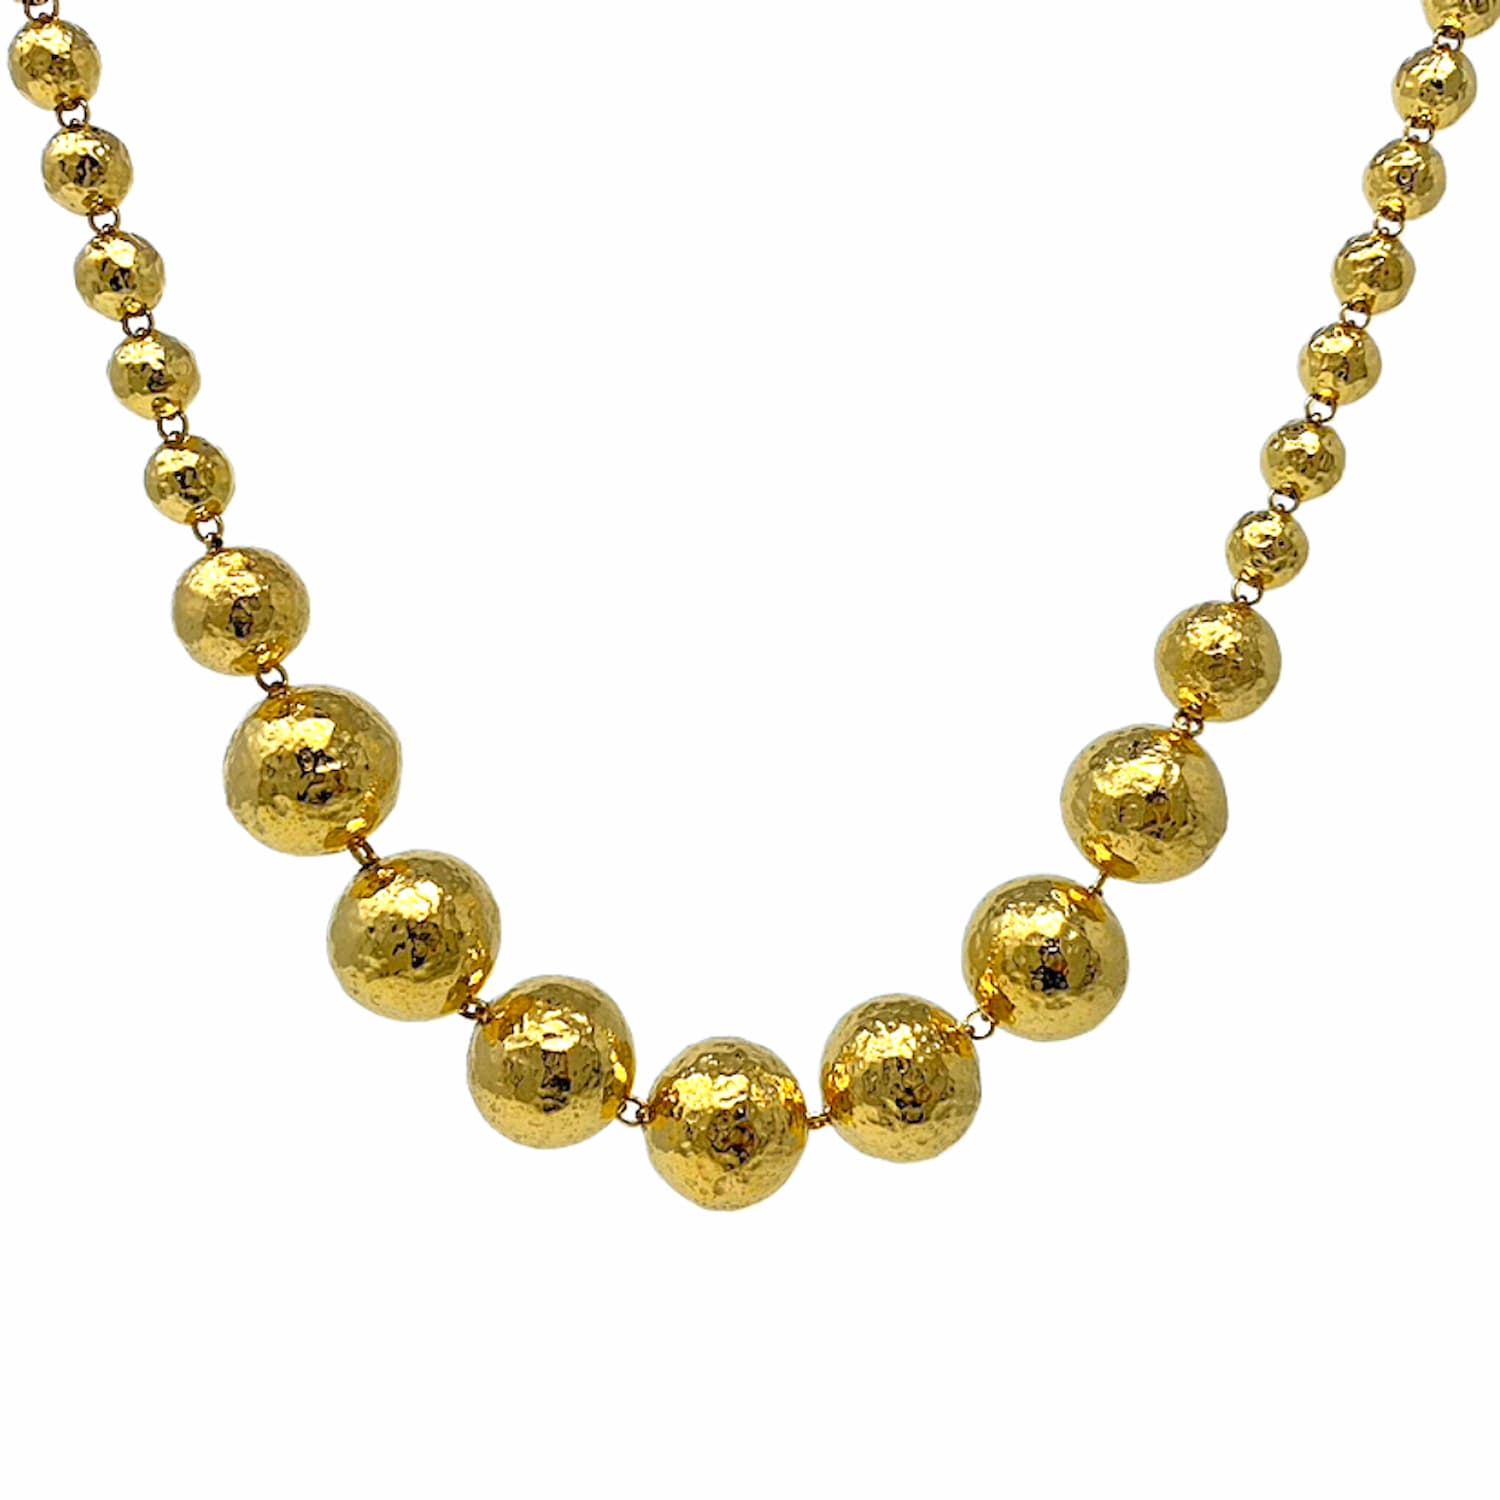 Sofia Necklace in Gold